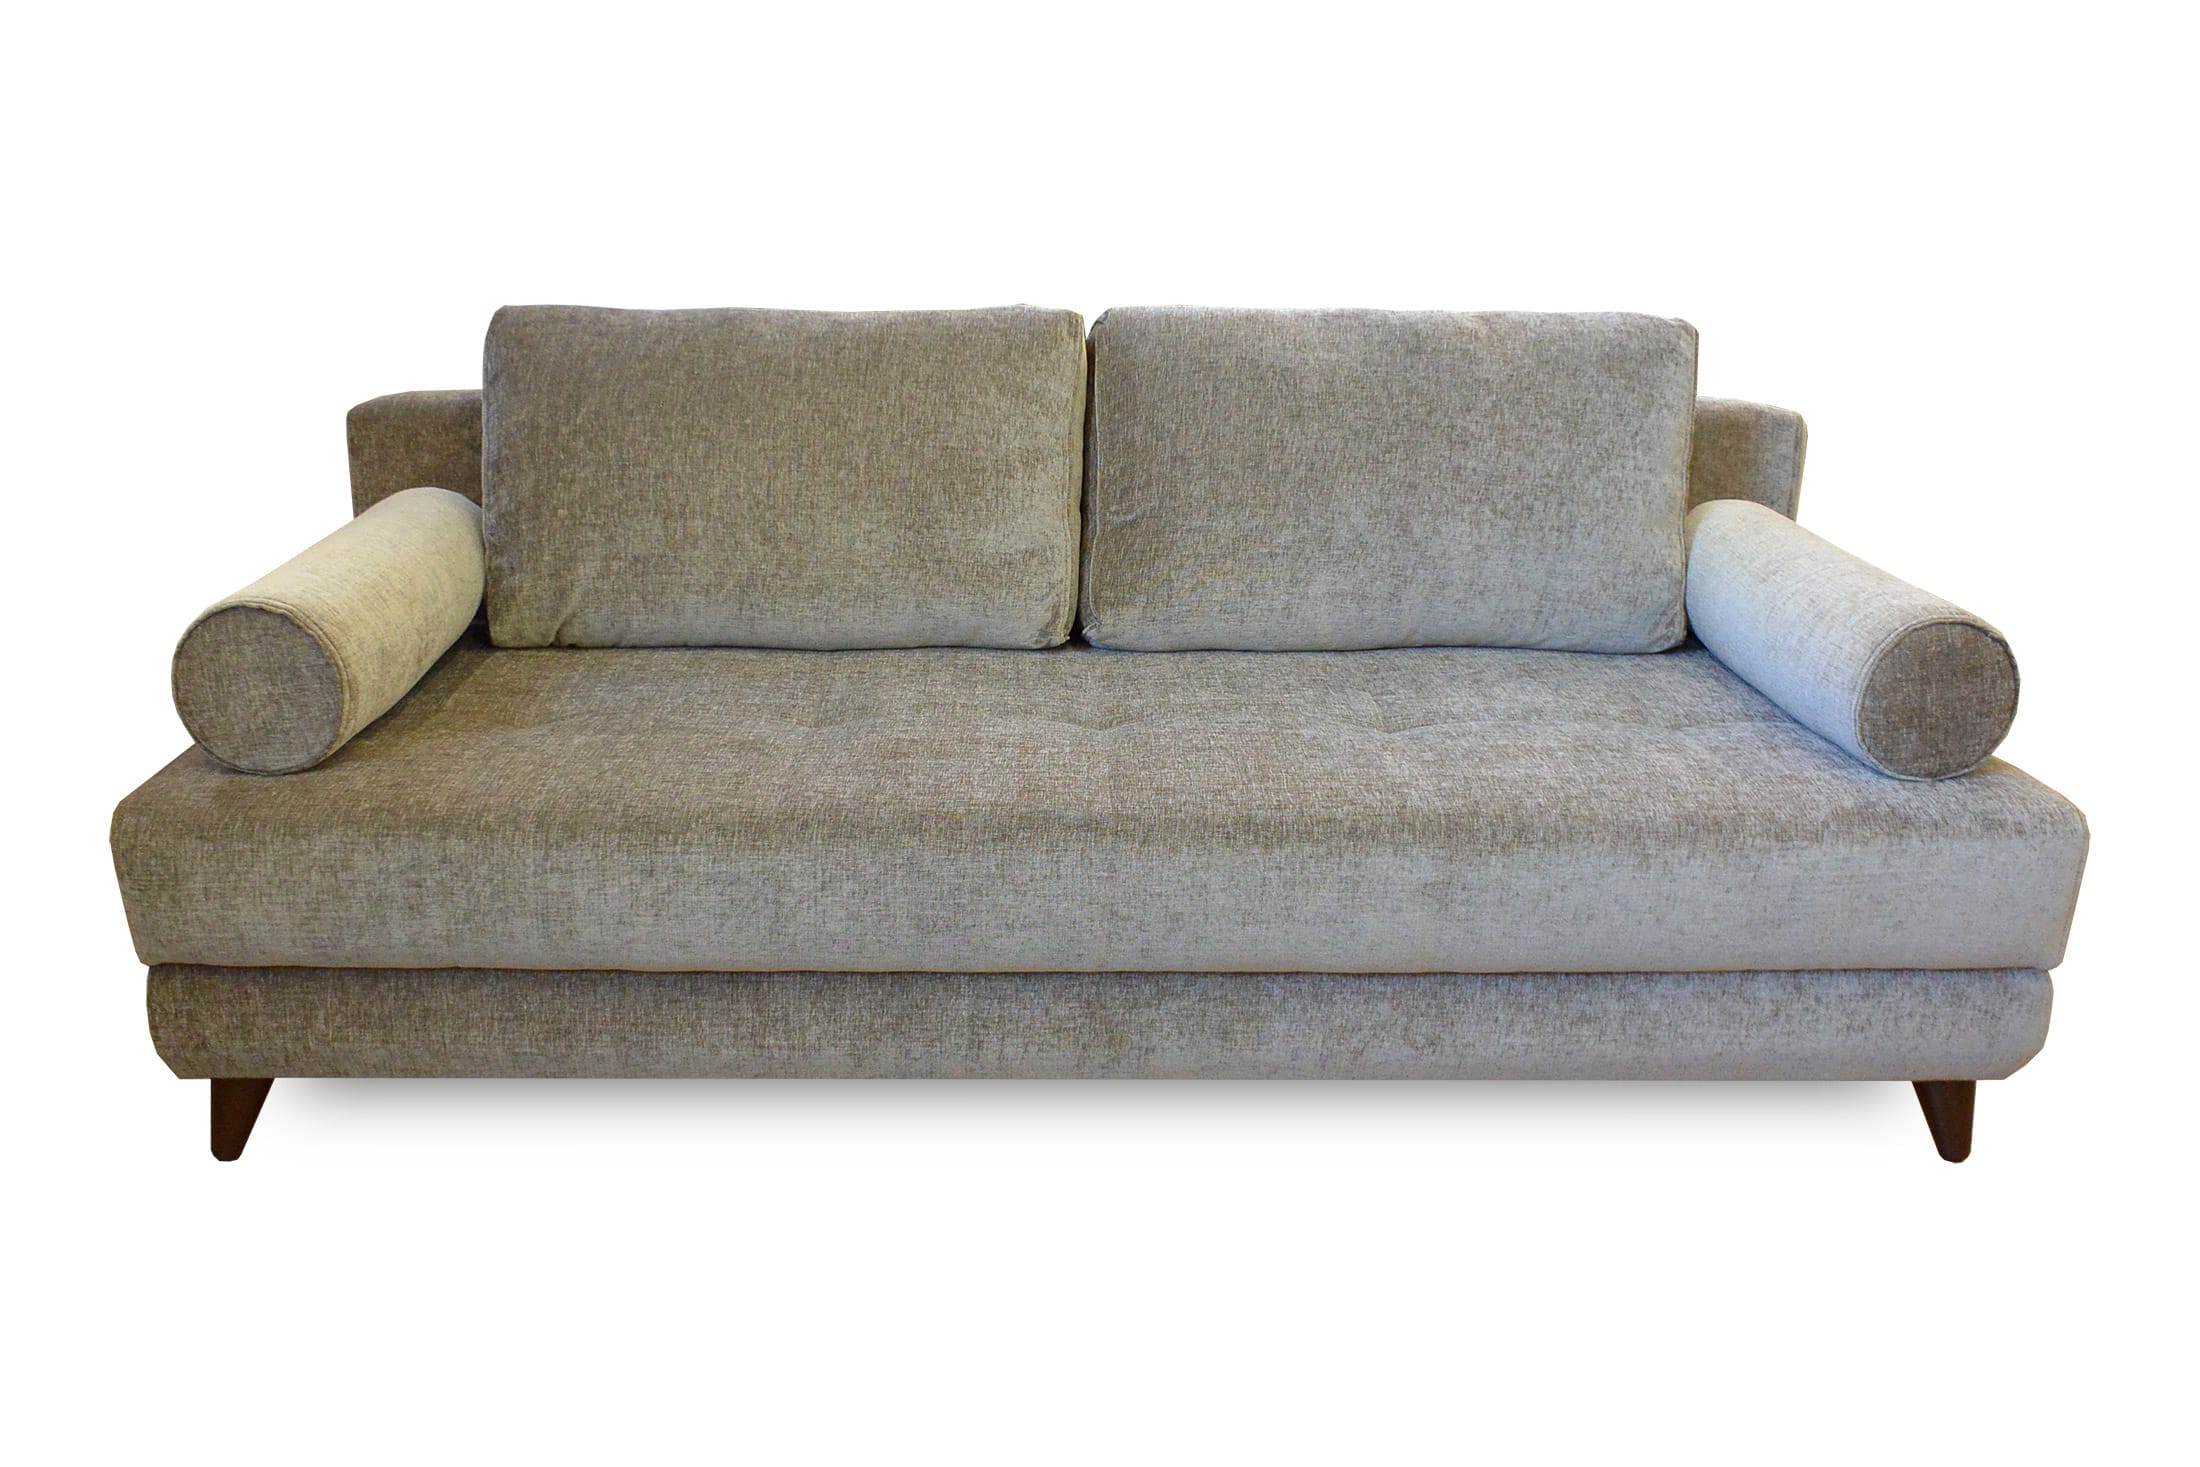 Stella Jennefer Light Brown Convertible Sofa Bed by Sunset